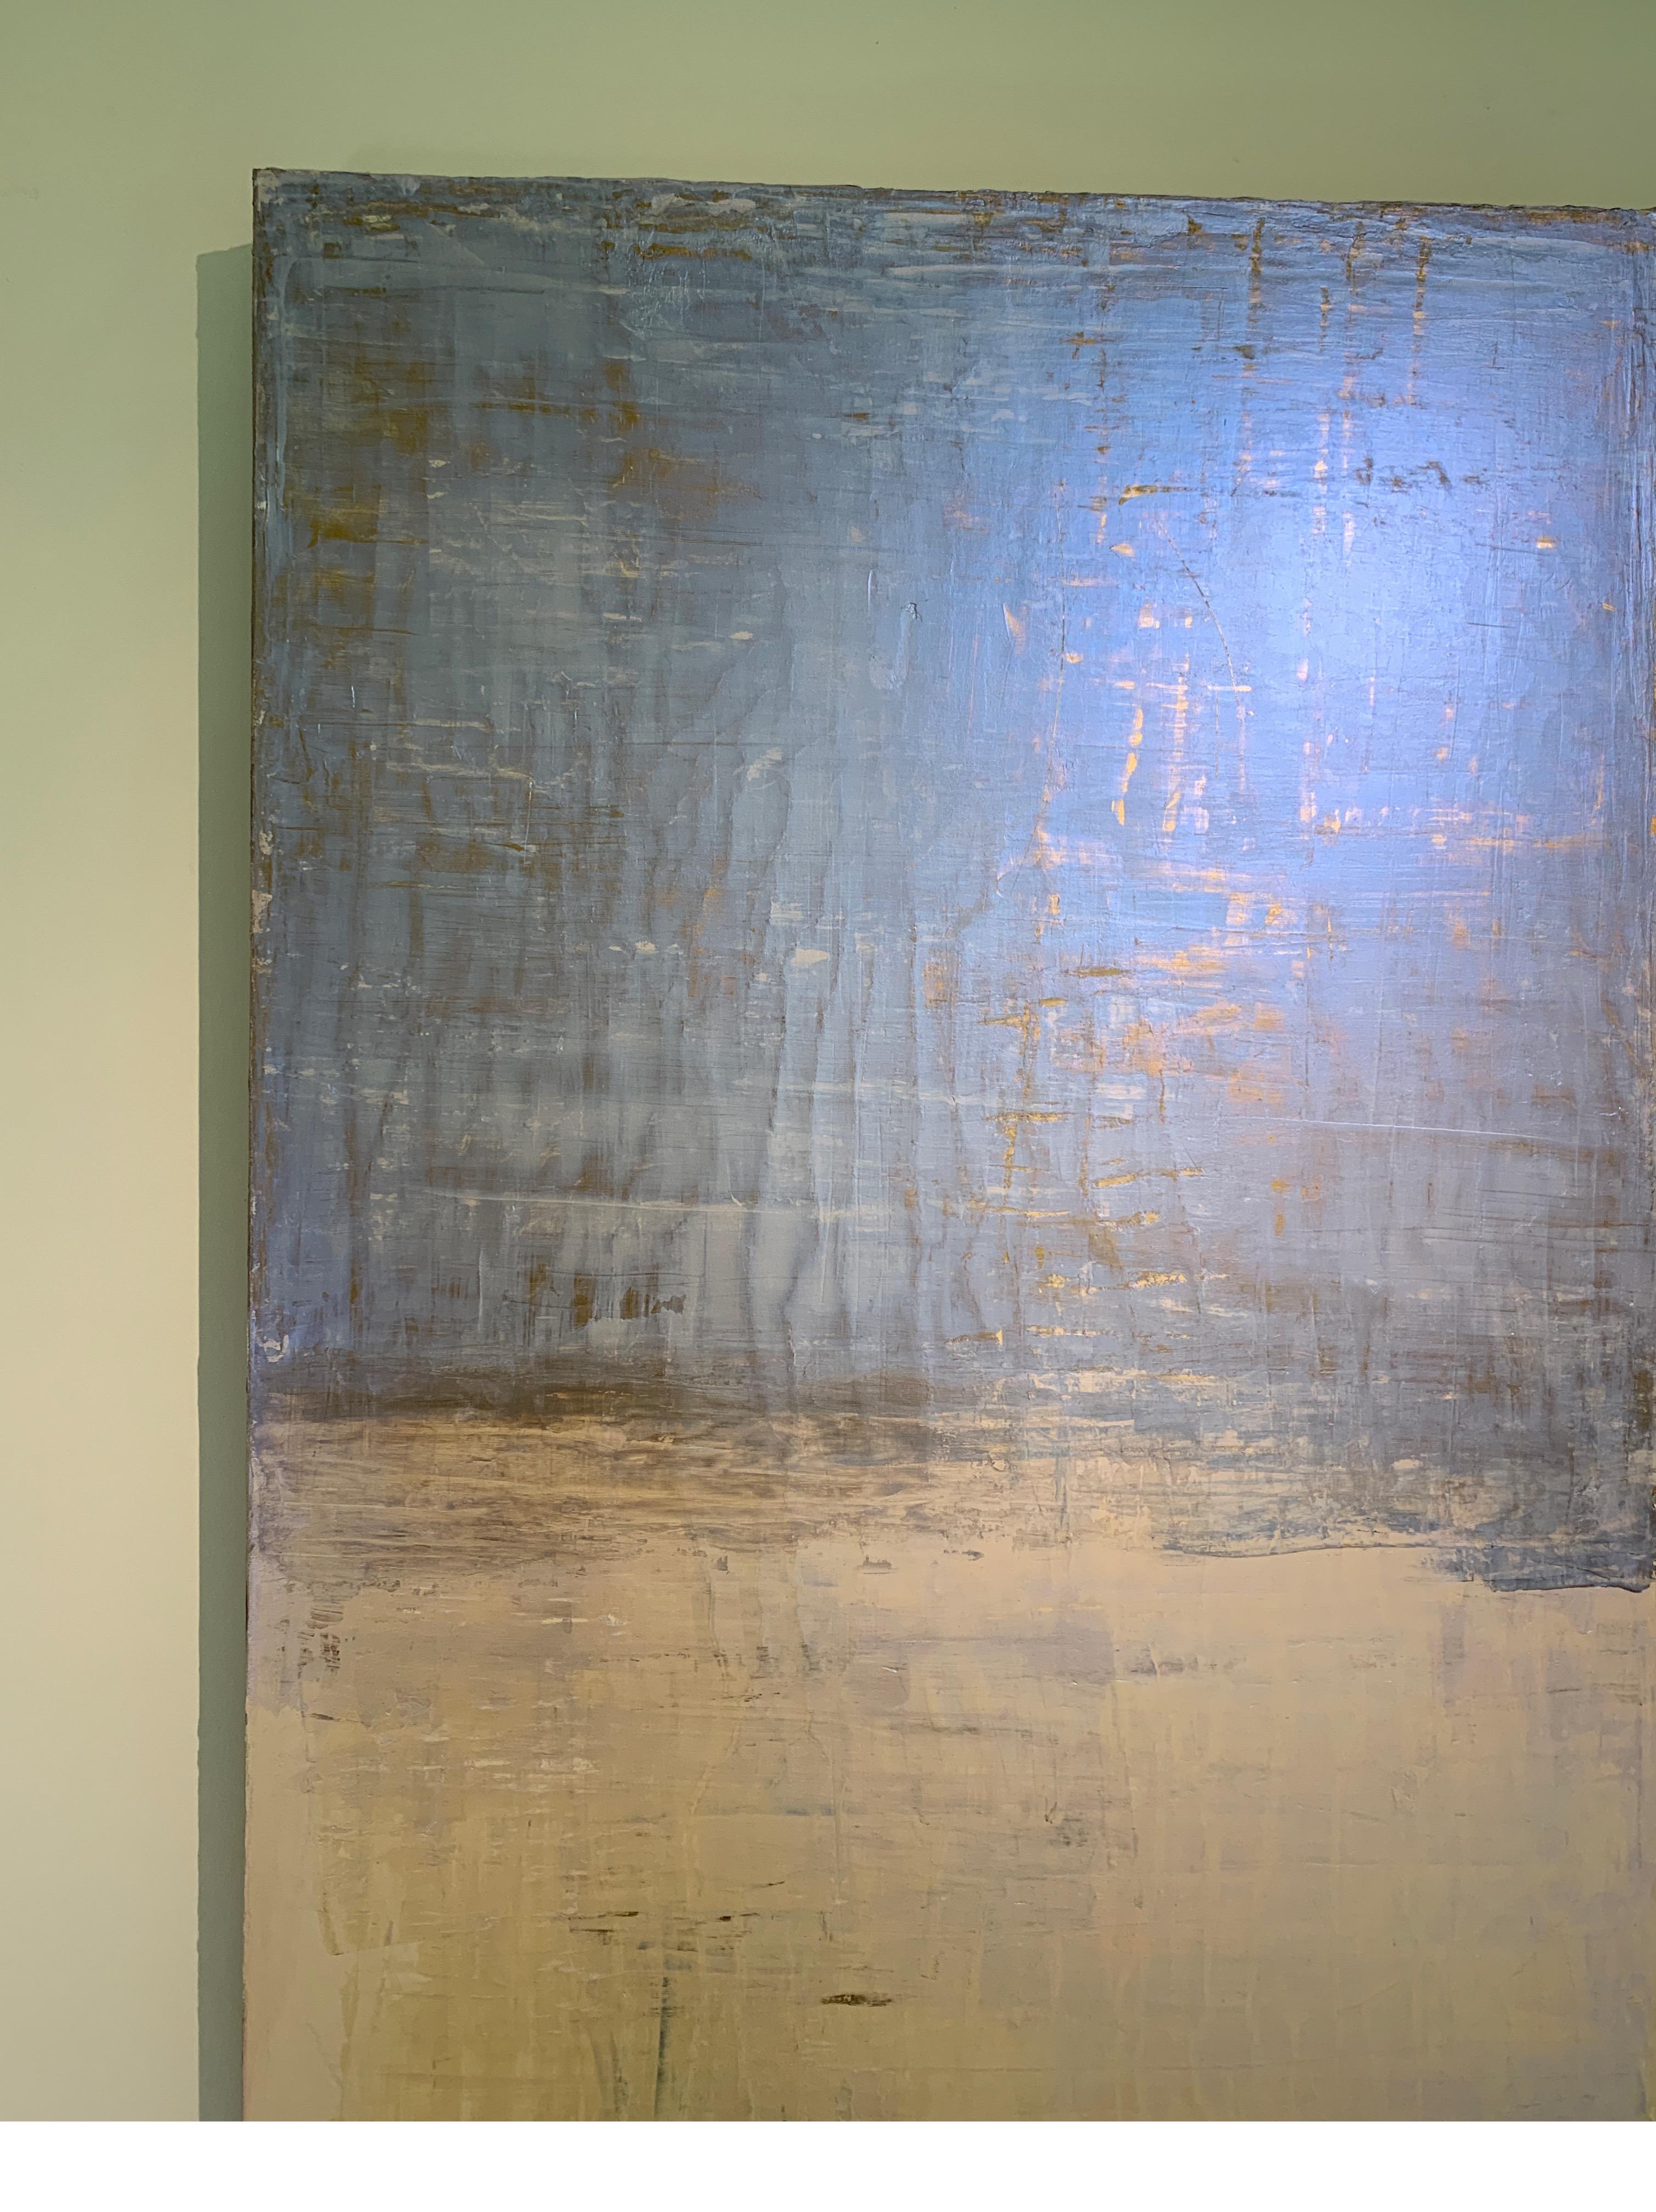 American Timeless Reverie Venetian Plaster and Acrylic by Carol Post, 2019